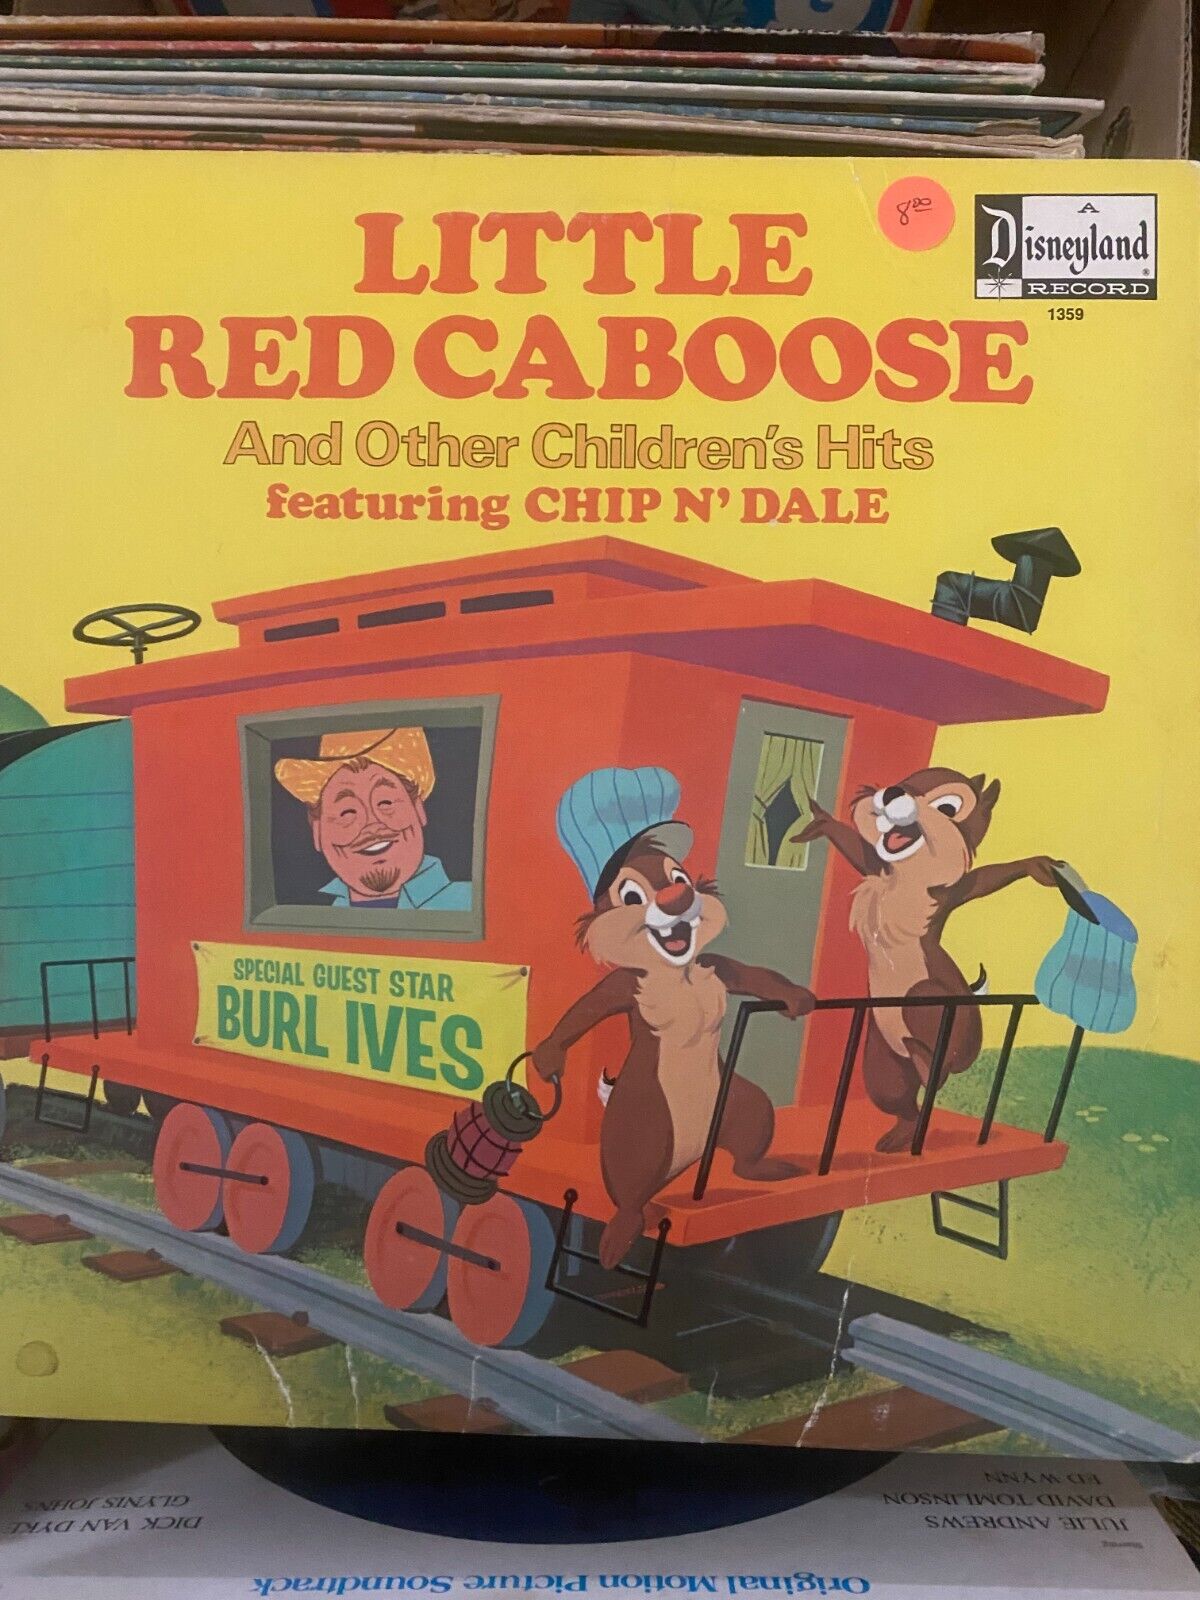 Little Red Caboose & Other Childrens Hits Vinyl LP Record Chip n Dale Burl Ives 